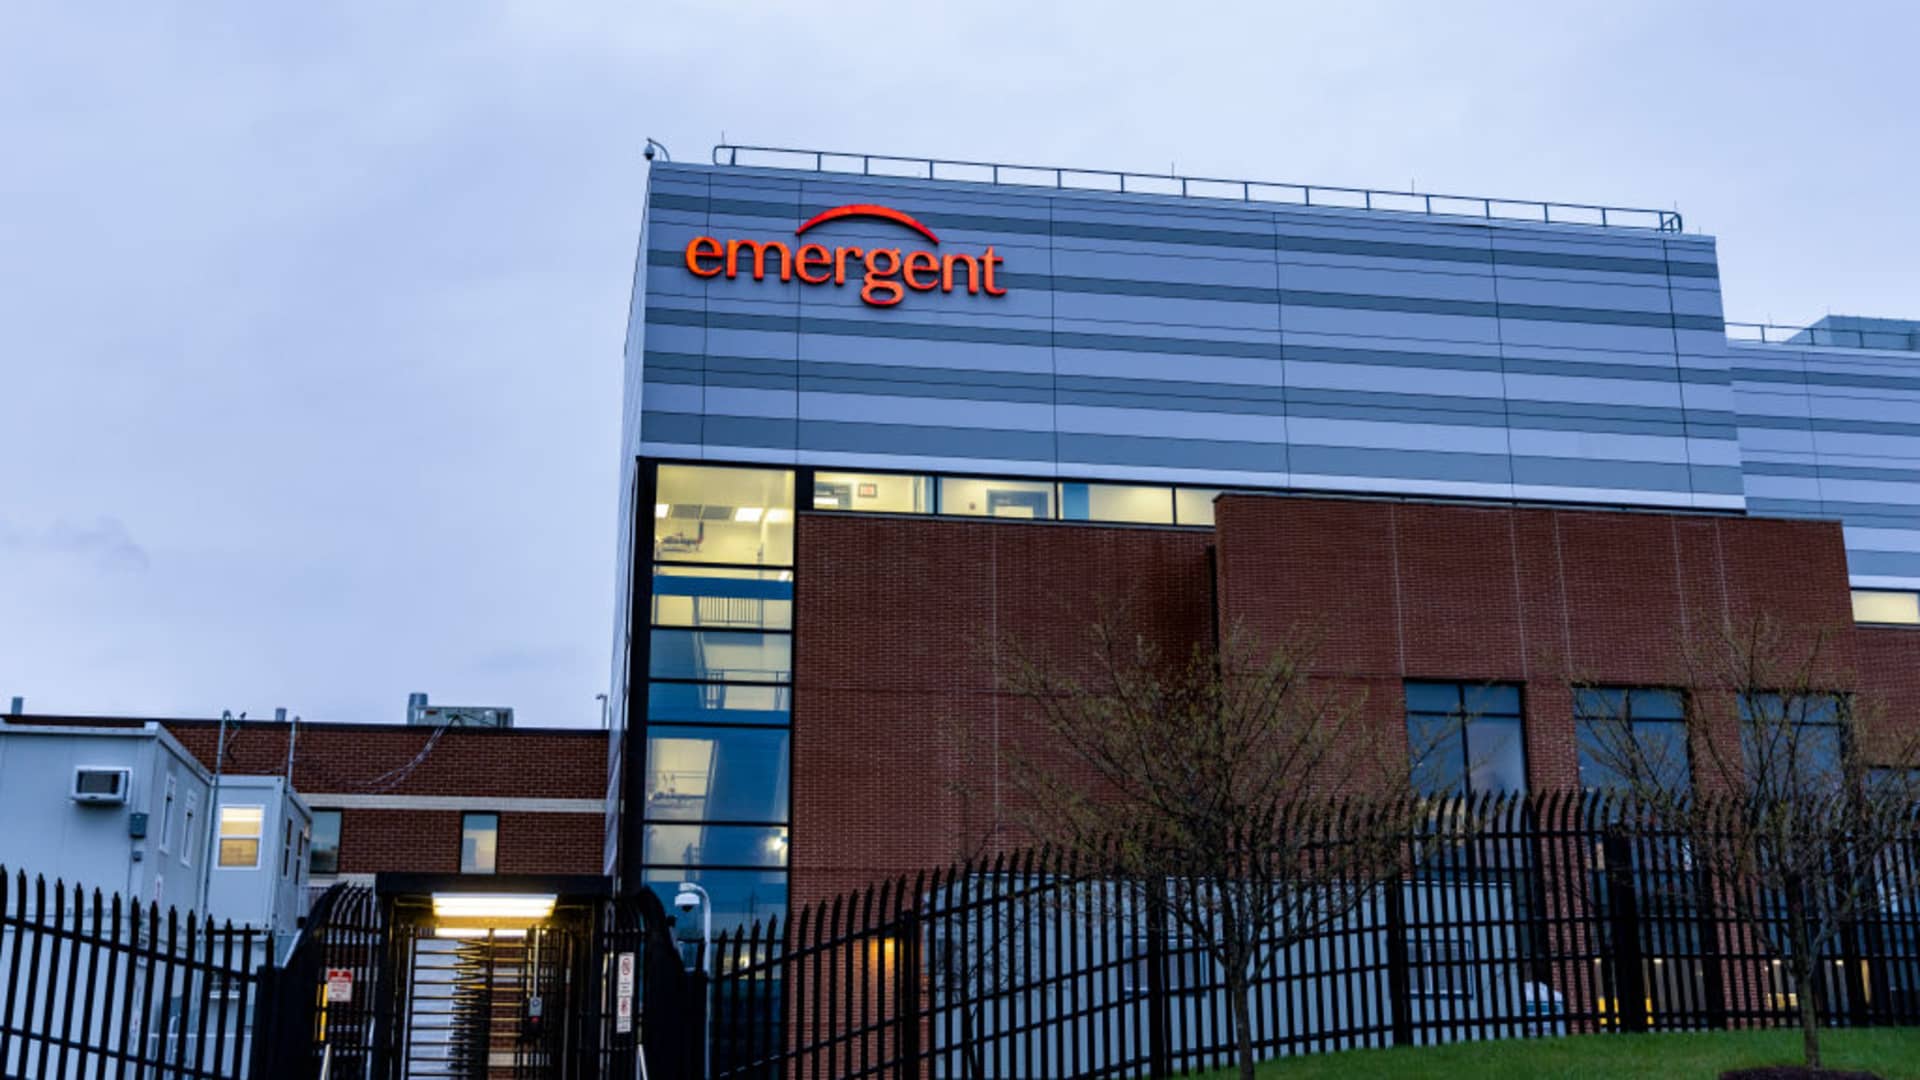 The exterior view of the Emergent BioSolutions plant on April 01, 2021 in Baltimore, Maryland. At this Baltimore Lab, 15 Million Doses Of Johnson & Johnson Vaccine were ruined, which will delay shipments of the vaccine in the United States.